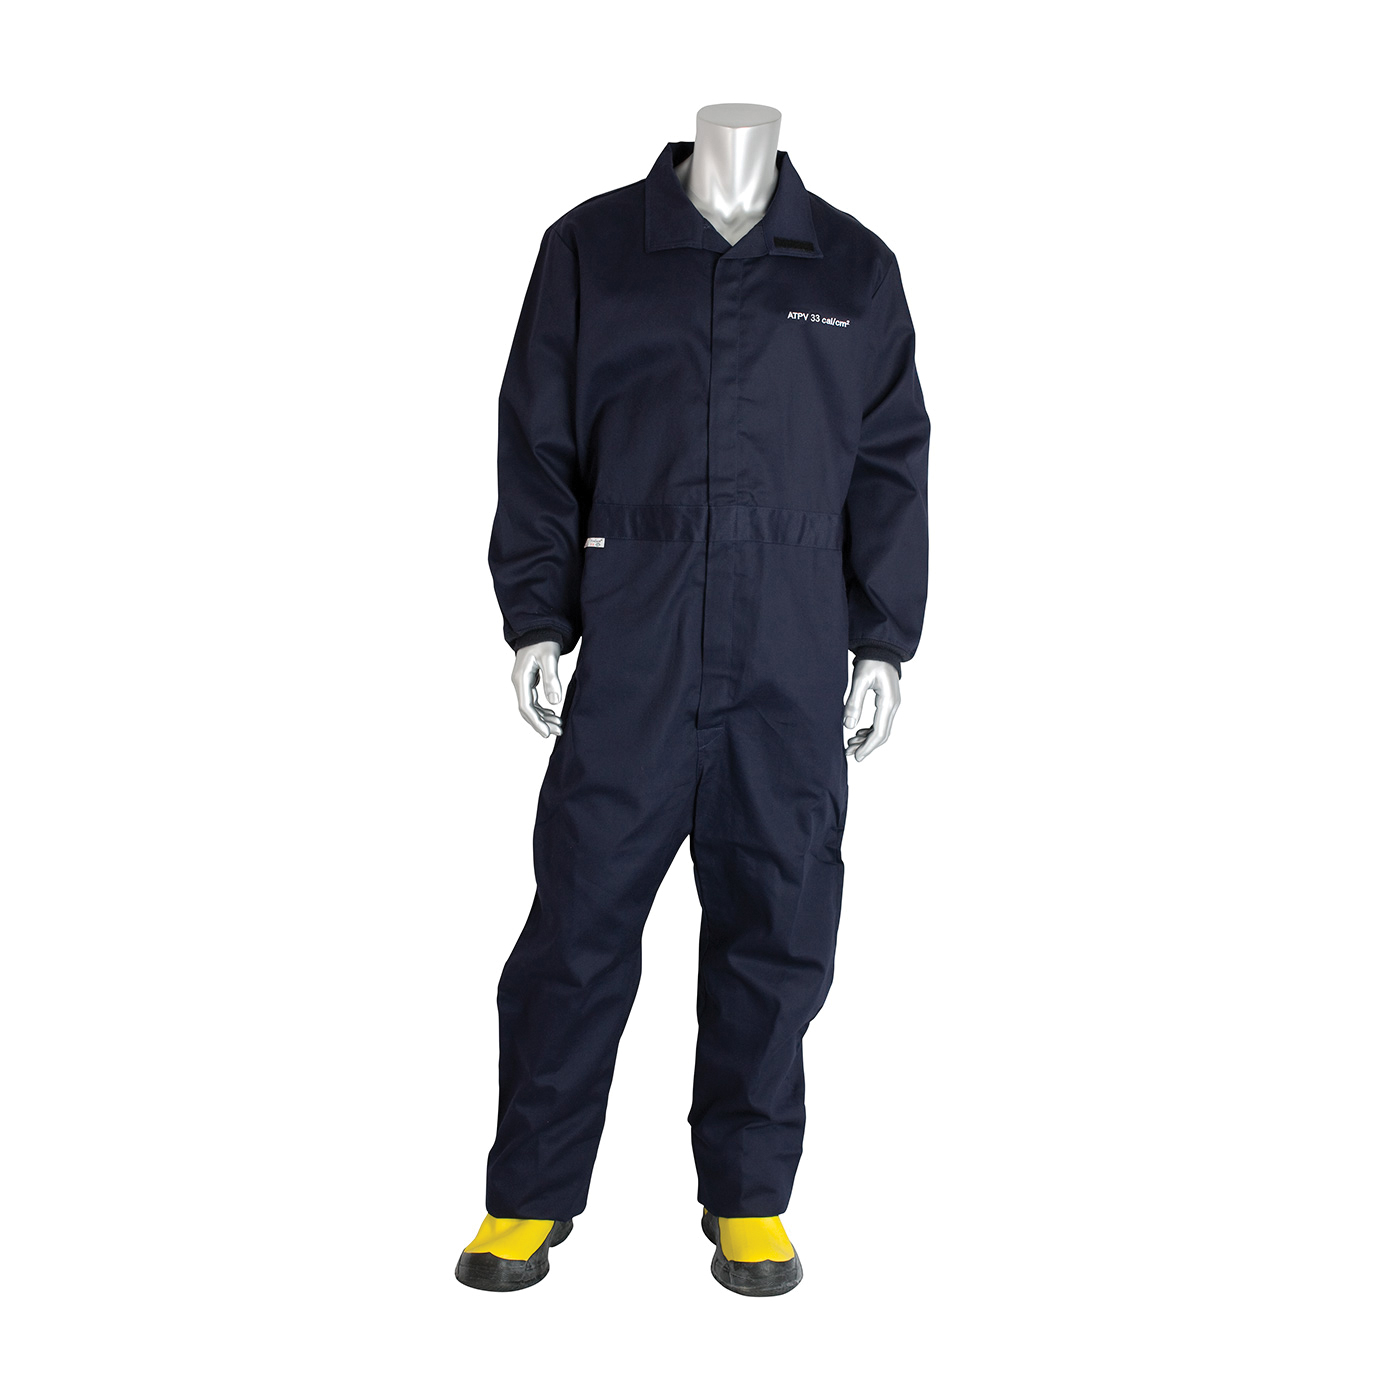 PIP® 9100-52758/L Flame Resistant Coverall, L, Navy, 88% Cotton/12% Nylon, 44 to 46 in Chest, 32 in L Inseam